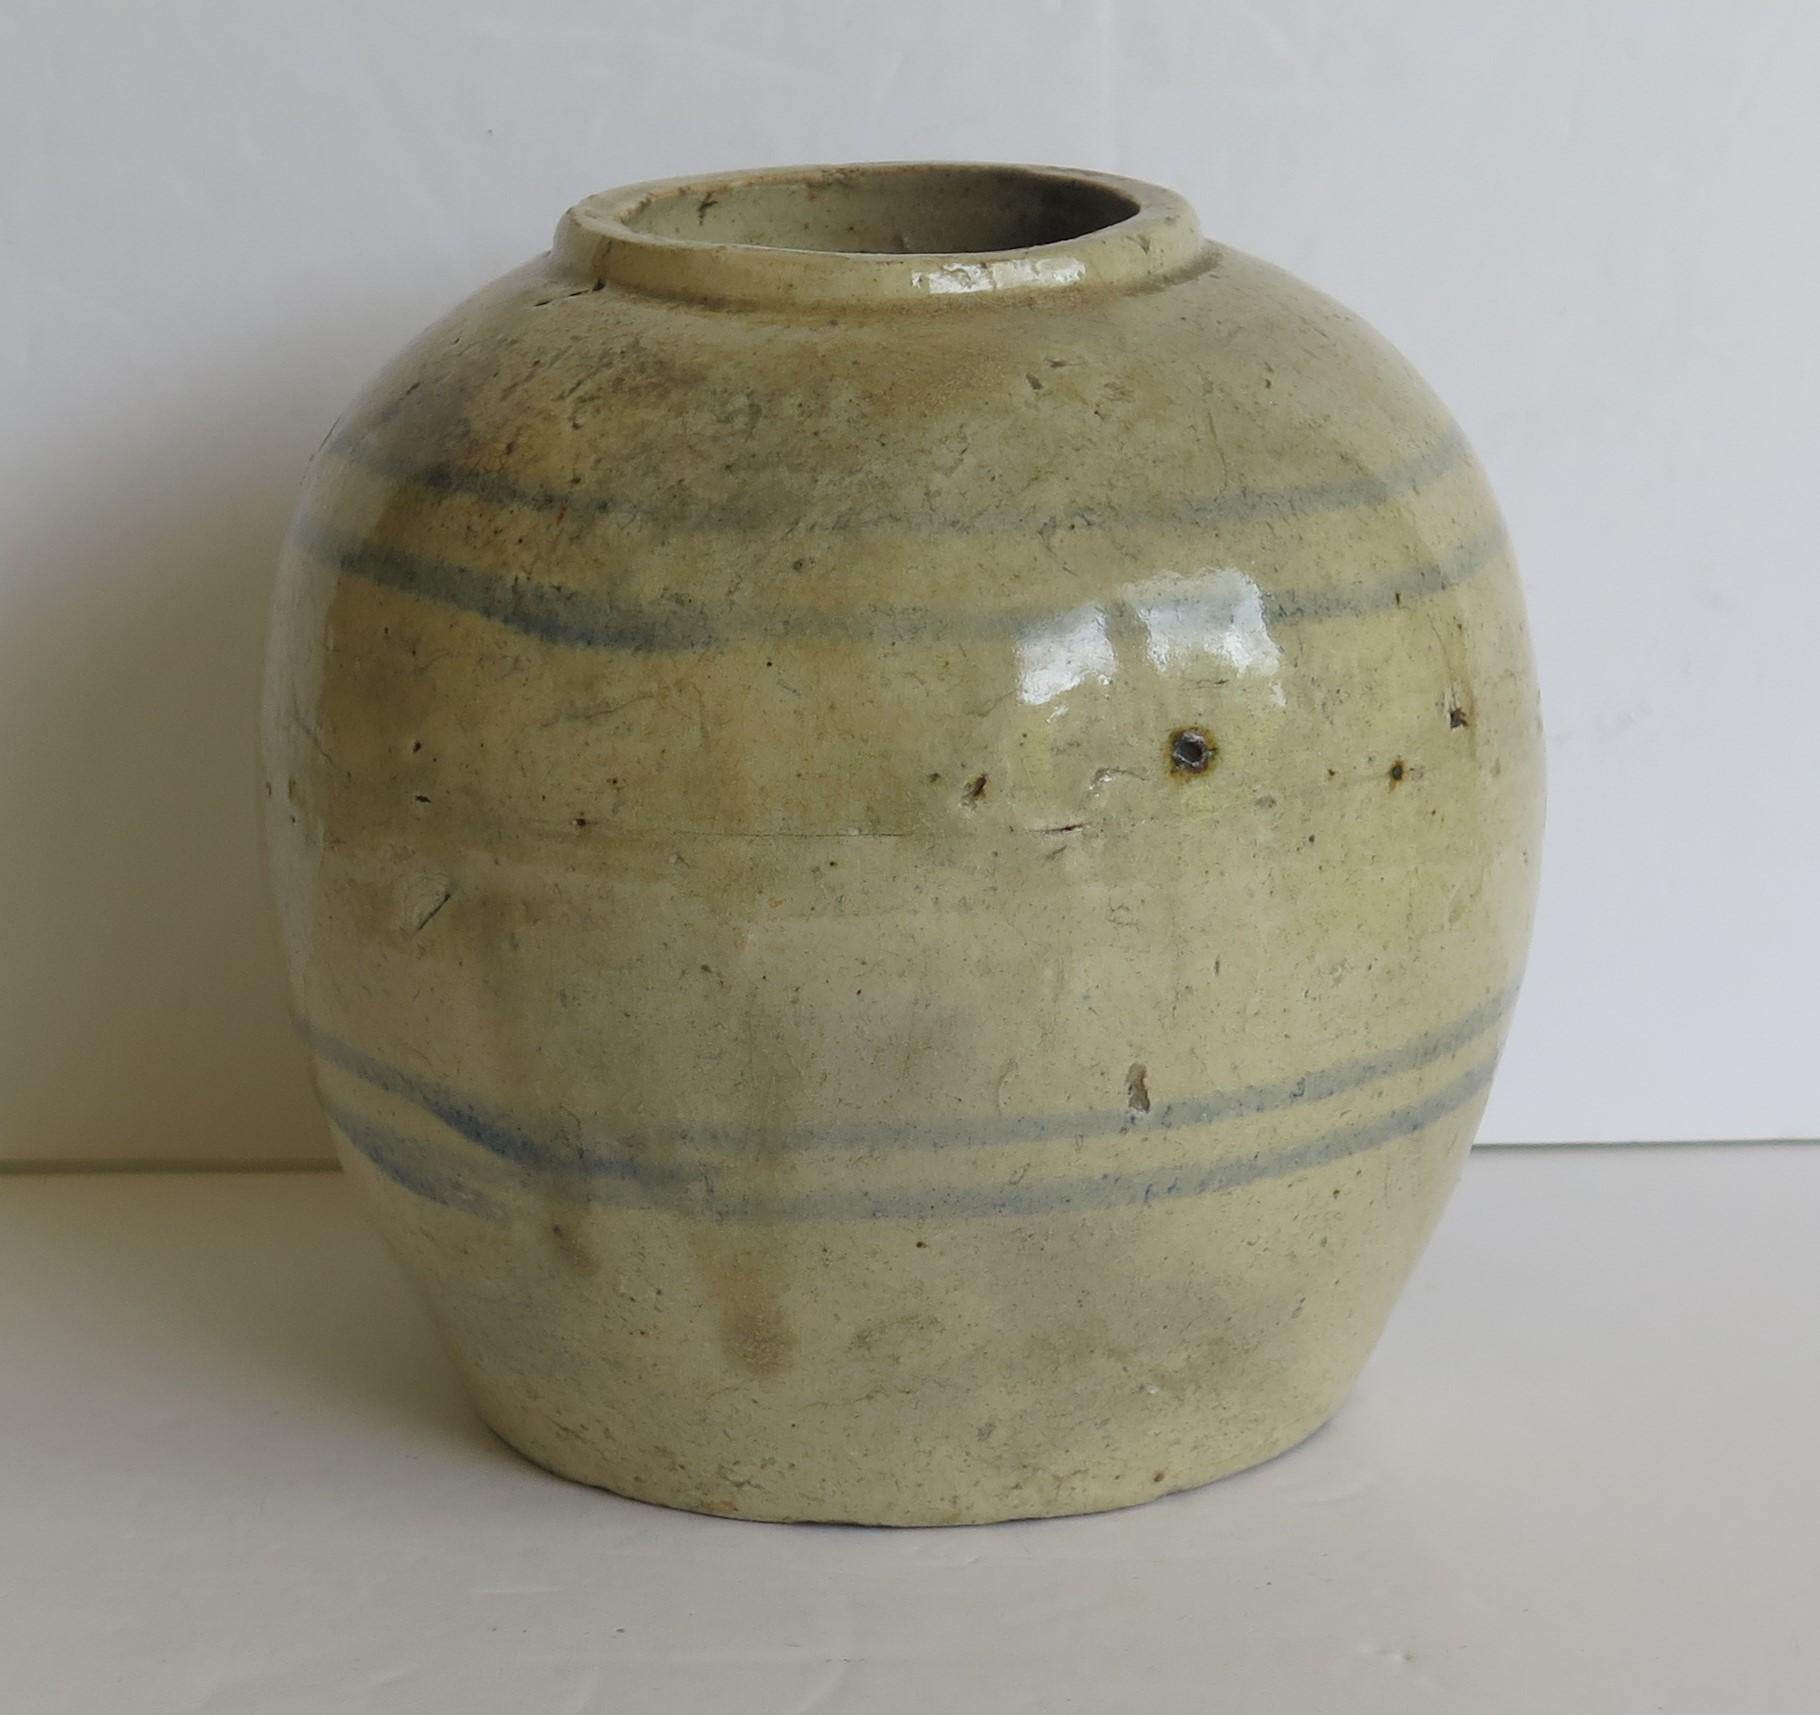 This is a Chinese handcrafted ceramic provincial jar or vase with a light celadon glaze which we date to the Ming period of the early 17th century or possibly earlier.

The jar is handcrafted, strongly potted with a short neck and simply decorated